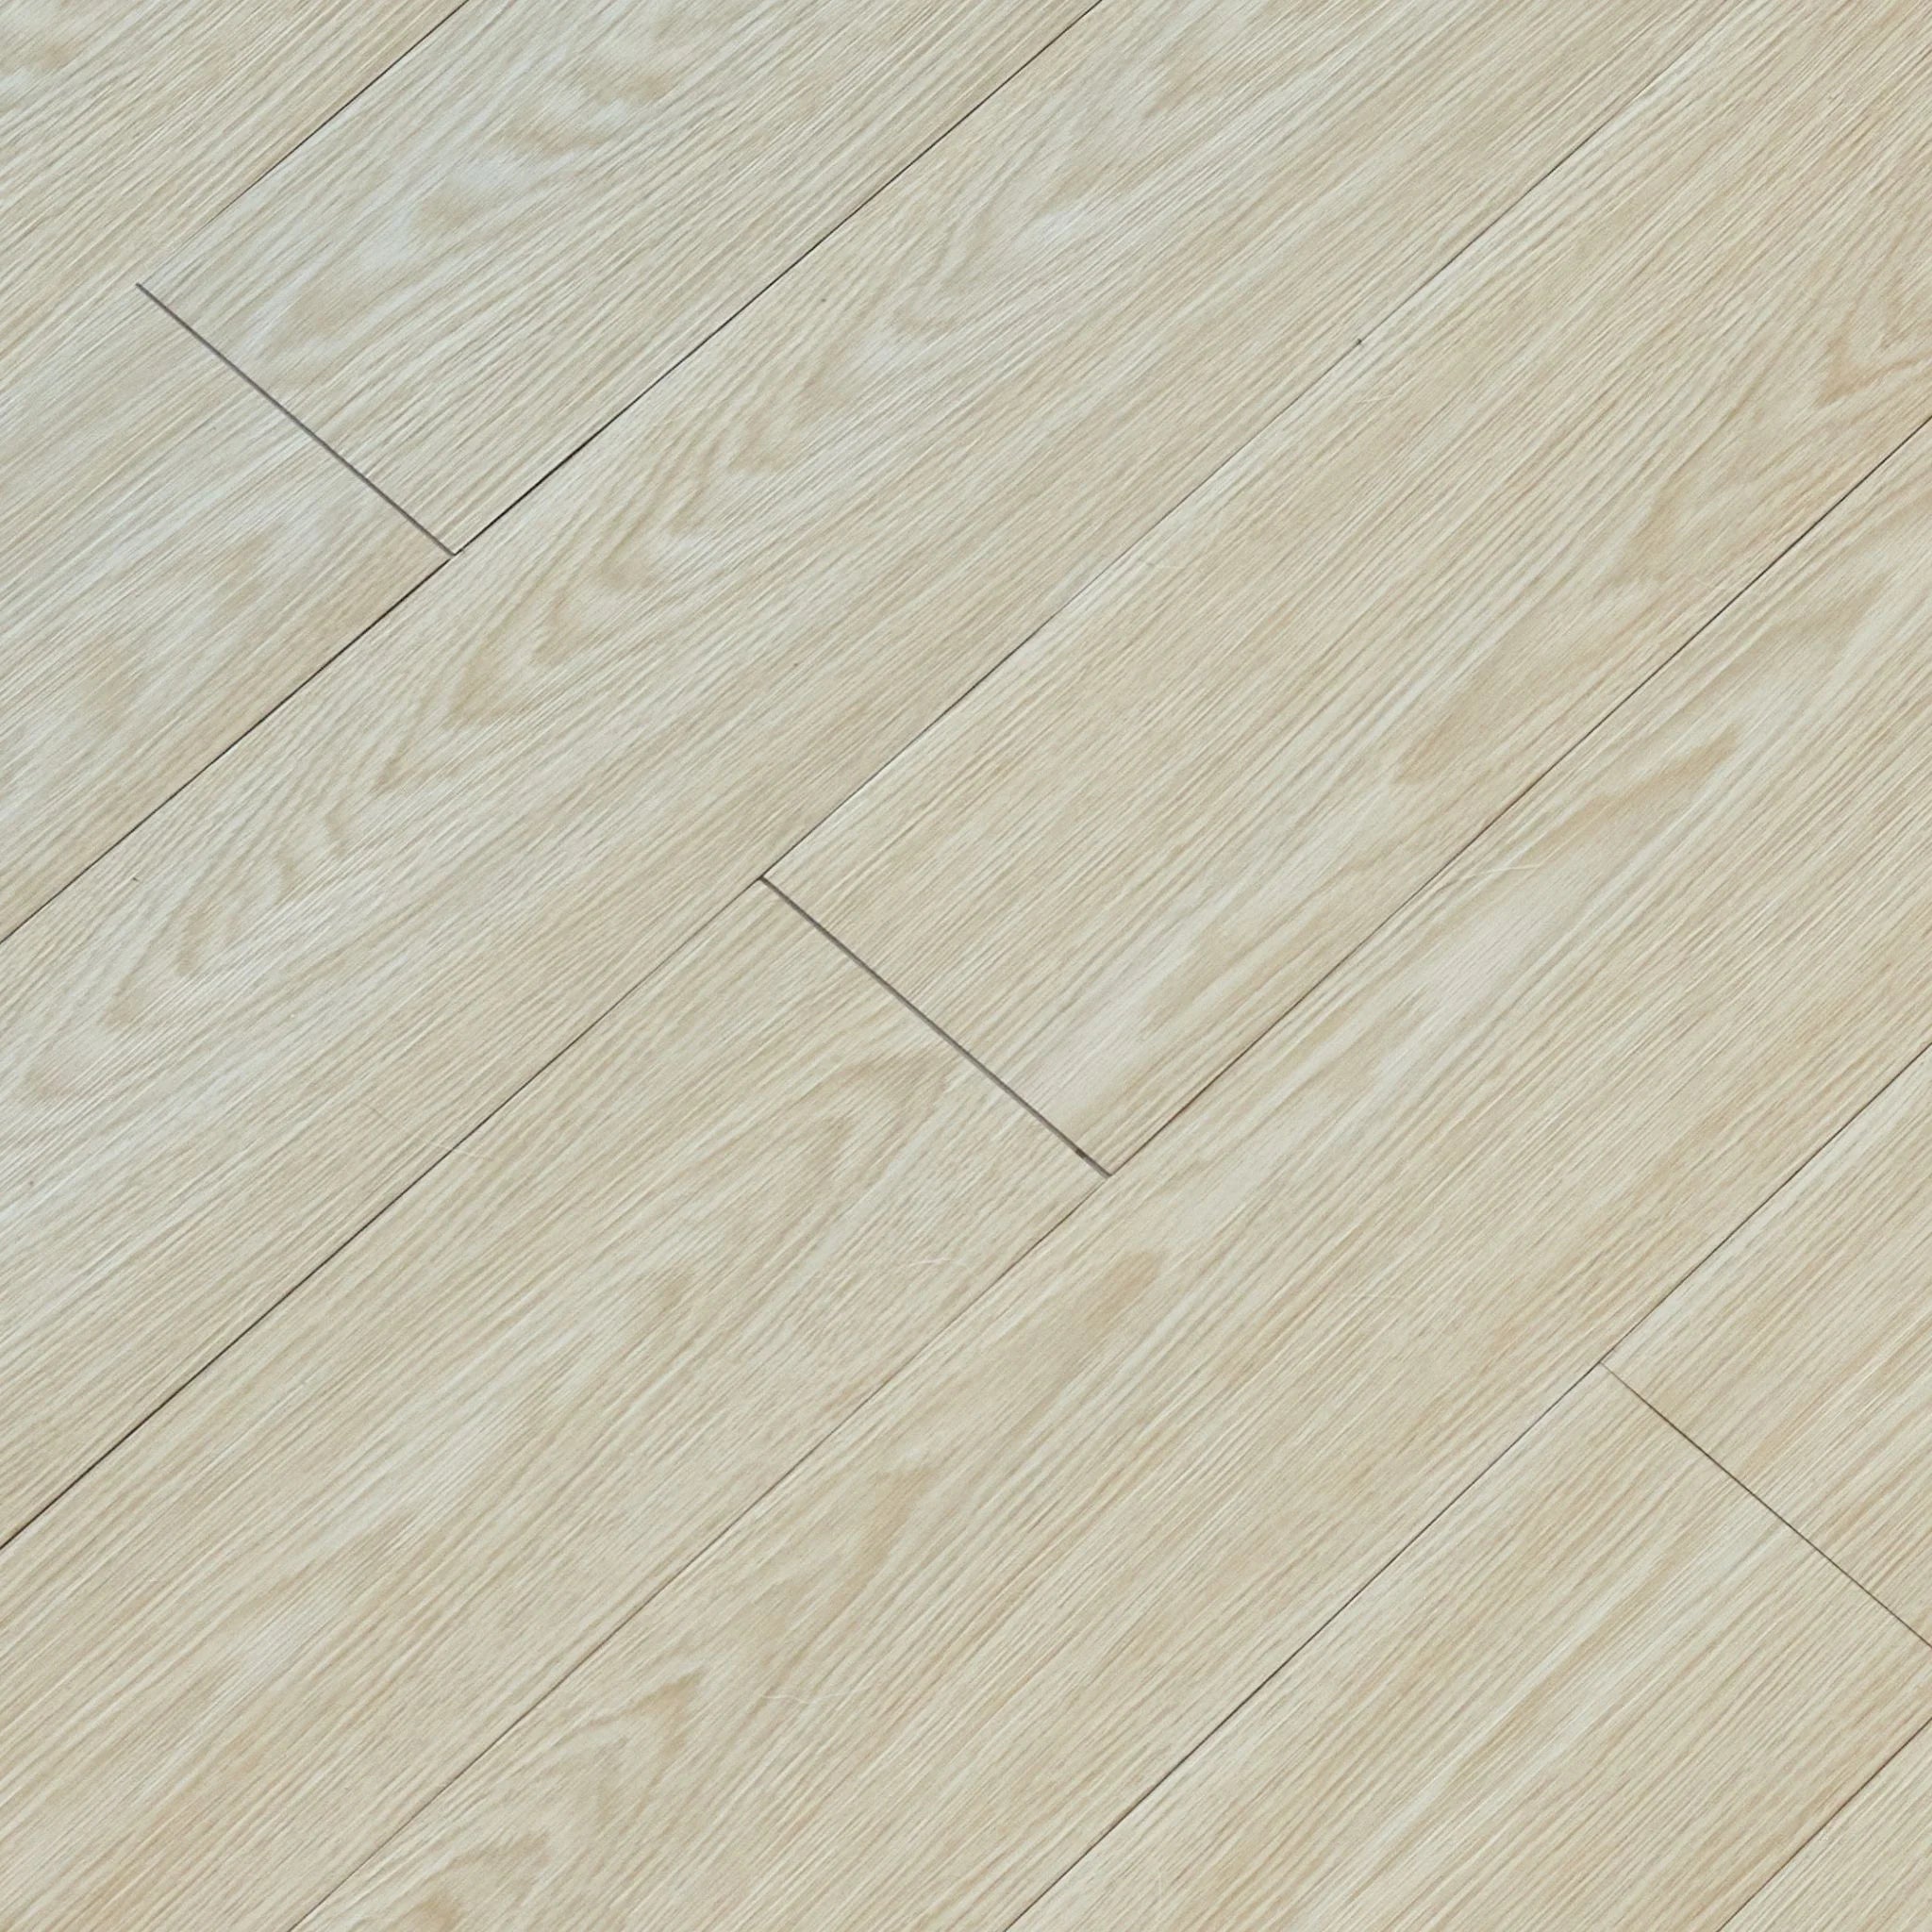 close-up of a wood-effect vinyl plank in natural beige wood